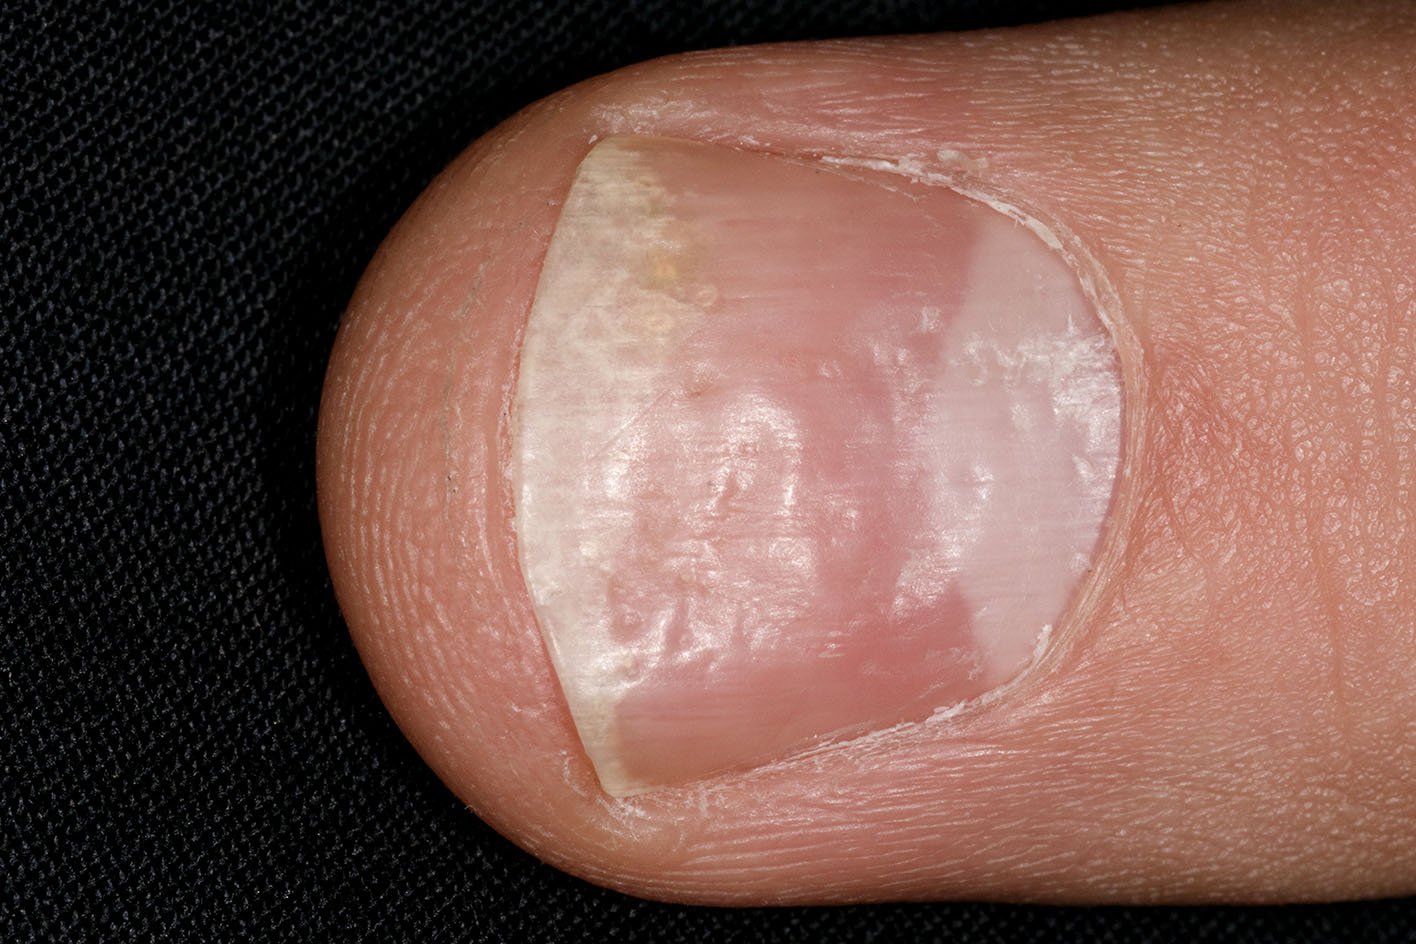 Small dents or pits in your nails can be a sign of nail psoriasis, eczema o...